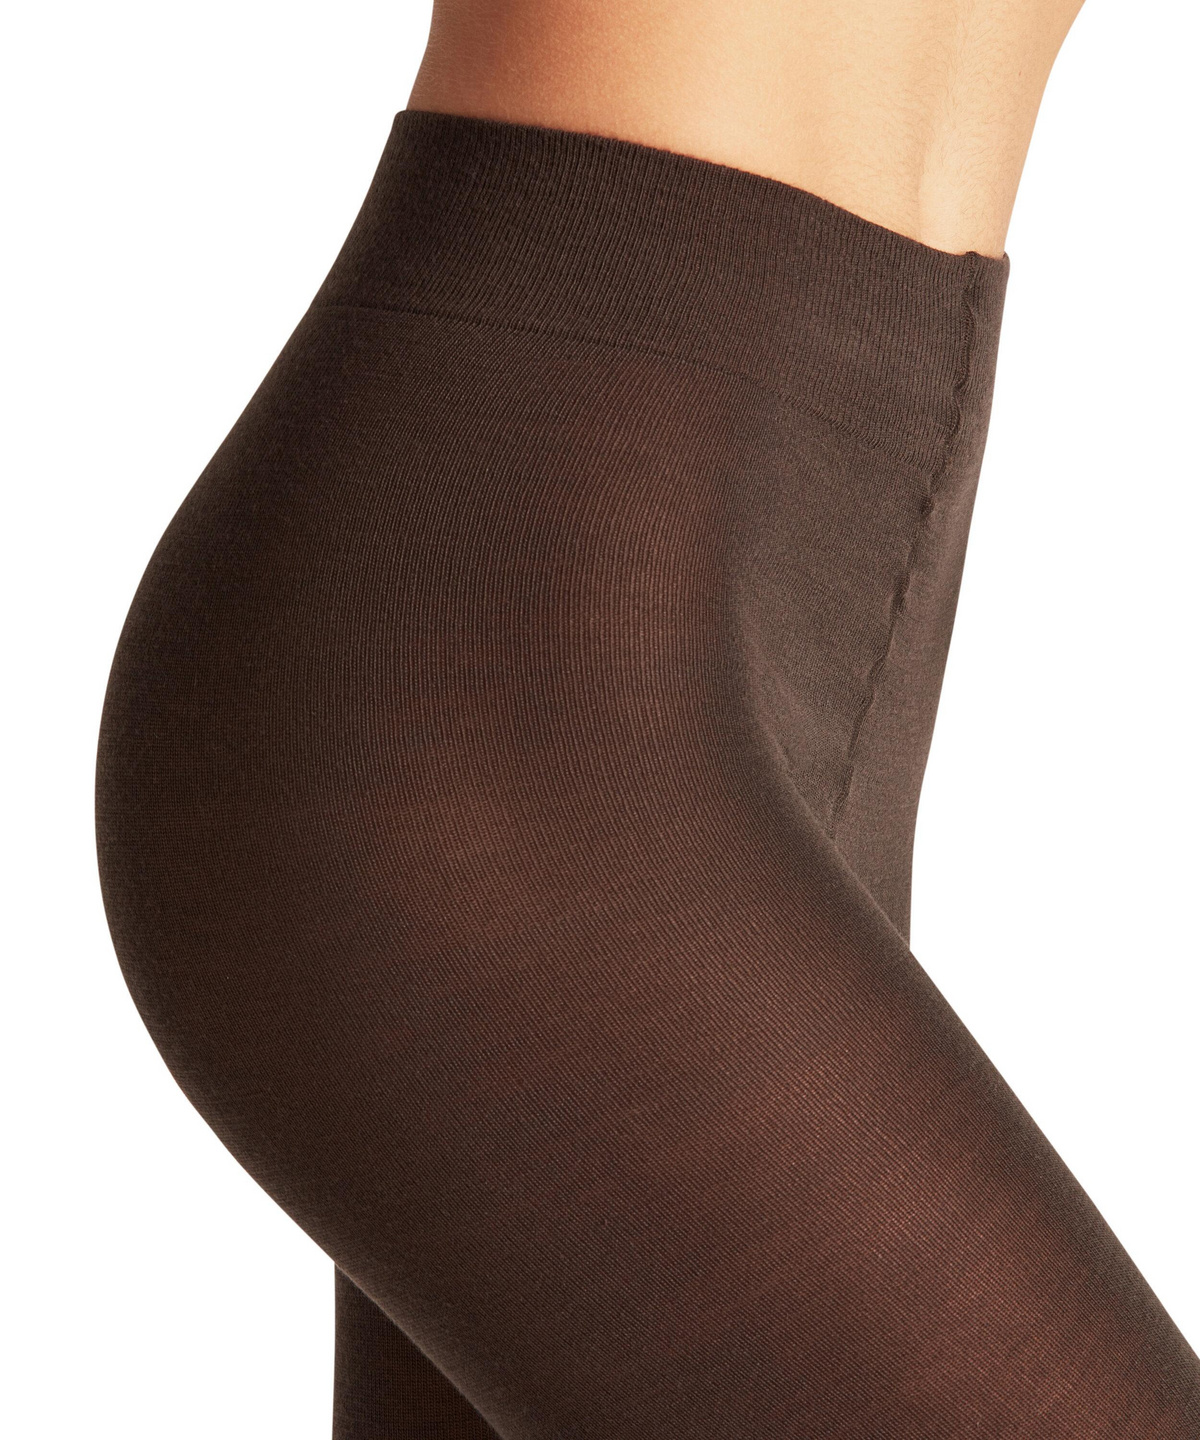 Brown Tights for Women Soft and Durable Opaque Pantyhose Tights